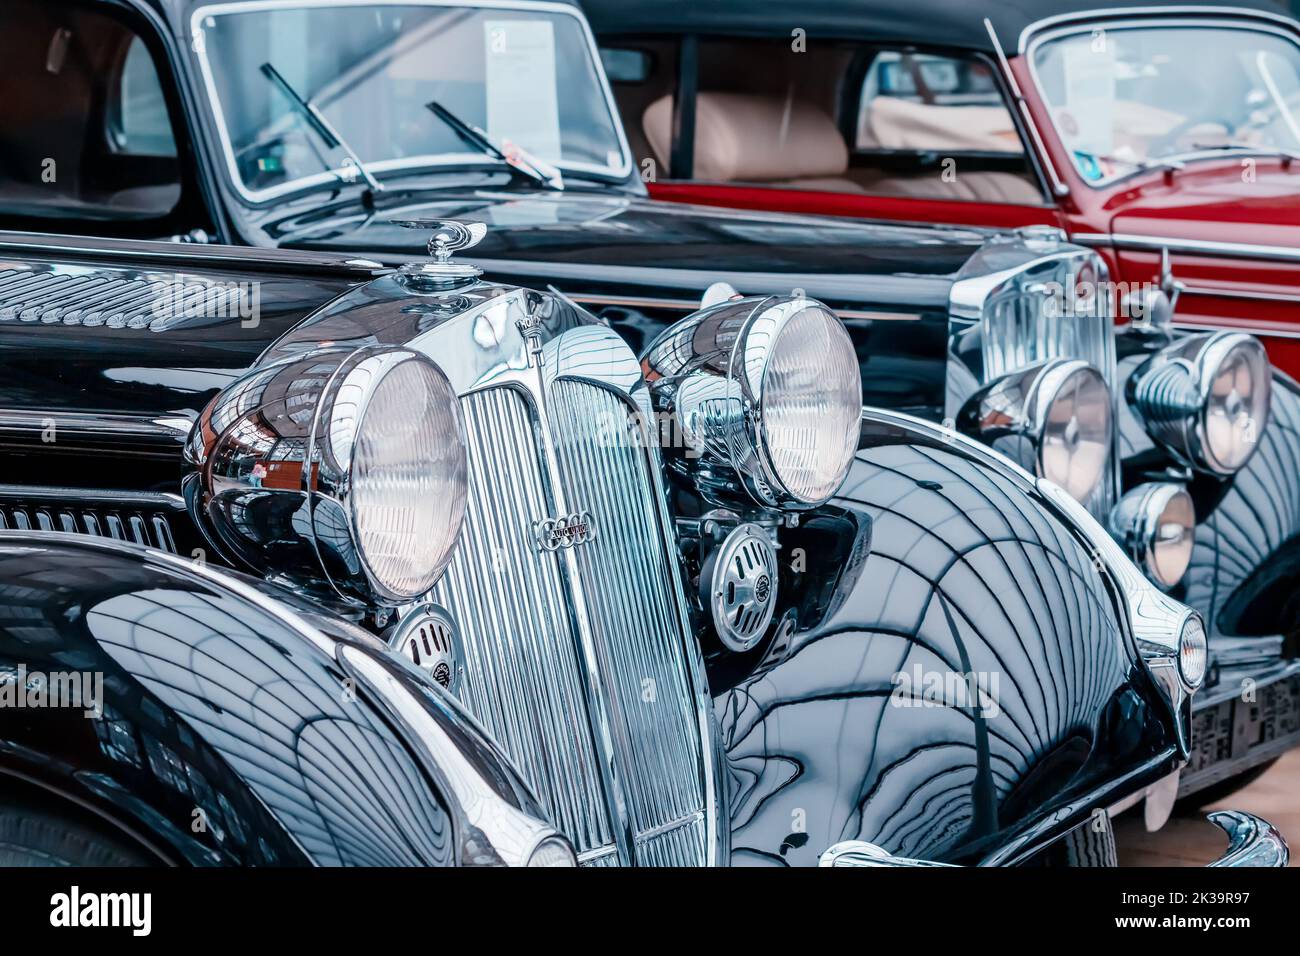 21 July 2022, Dusseldorf, Germany: Close-up of a retro ca by Auto Union company, model Horch. Headlights and part of the hood. Stock Photo